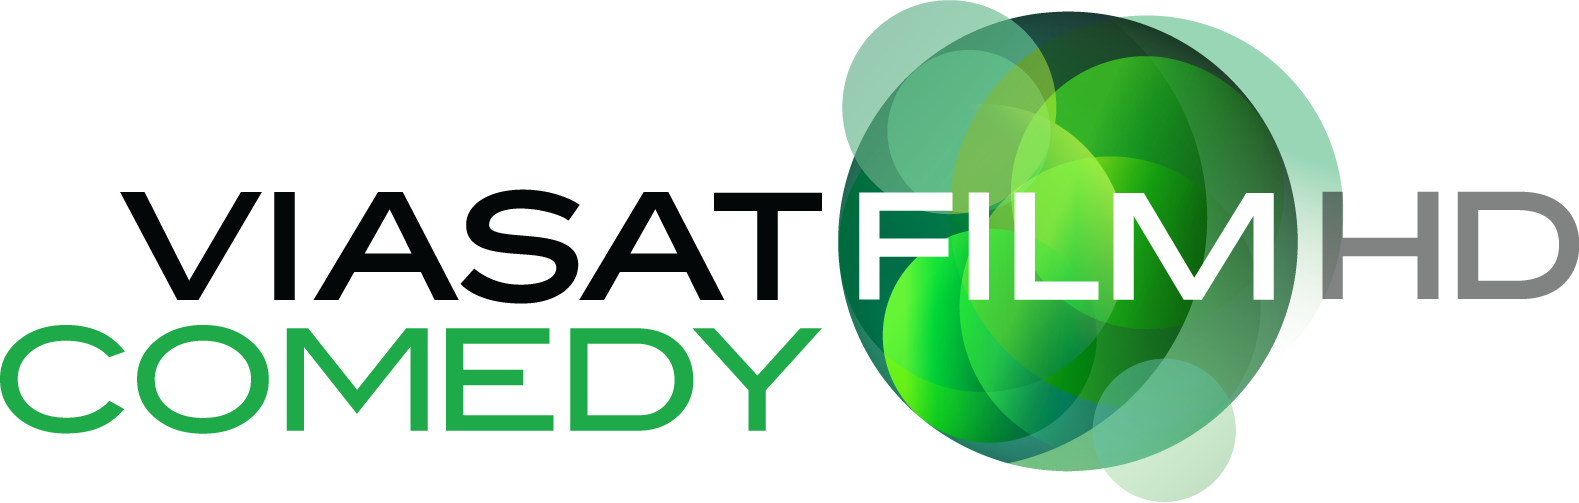 Viasat Film Comedy Hd.png - Comedy, Transparent background PNG HD thumbnail